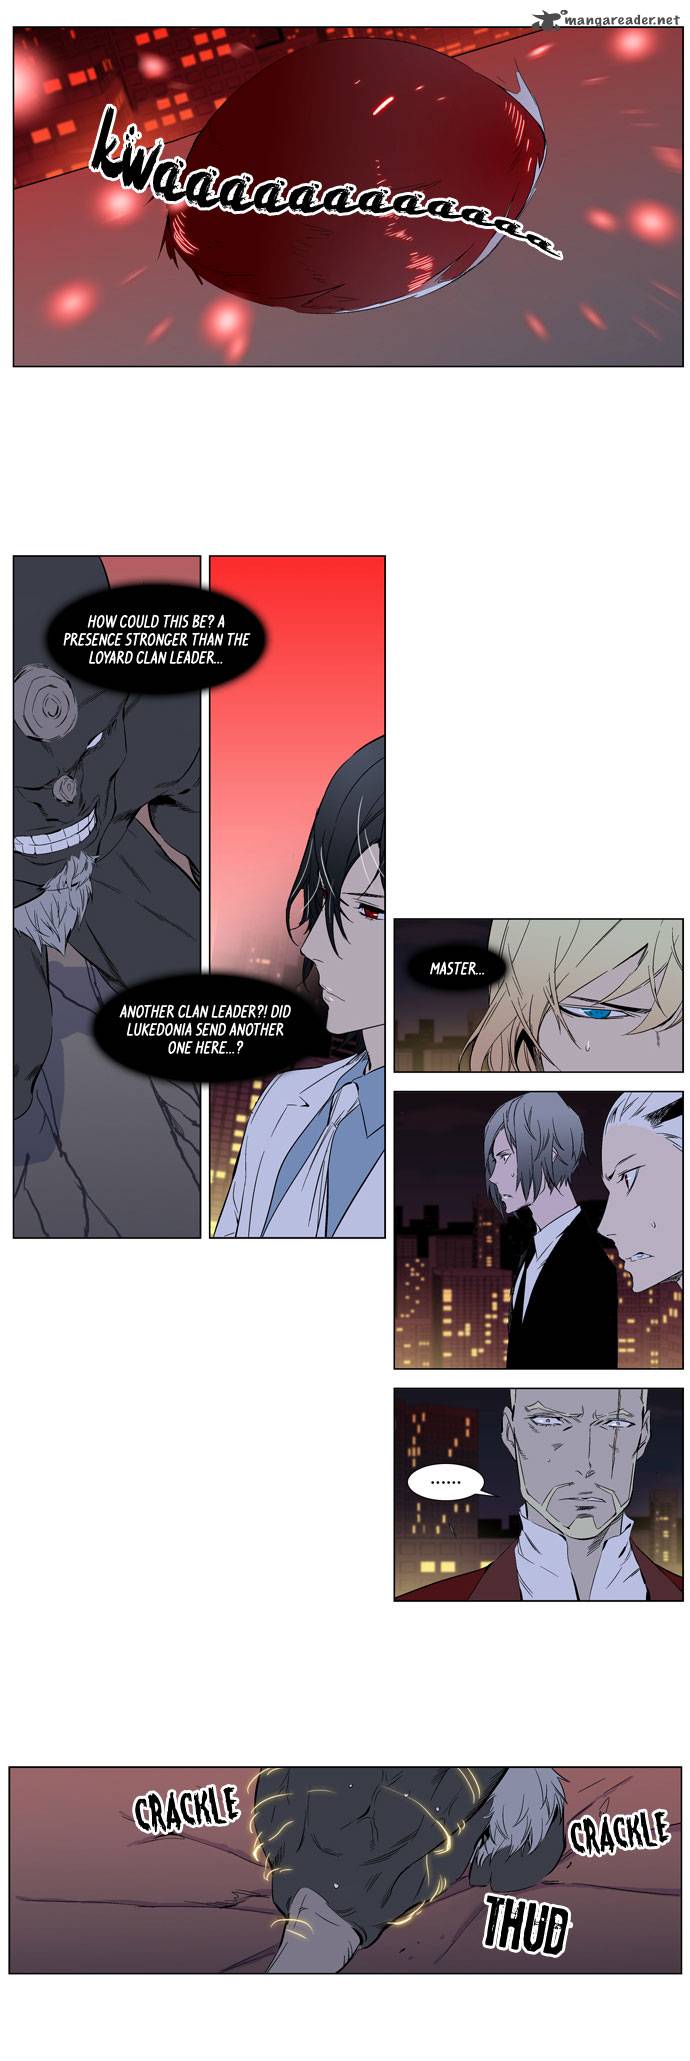 Noblesse 261 3